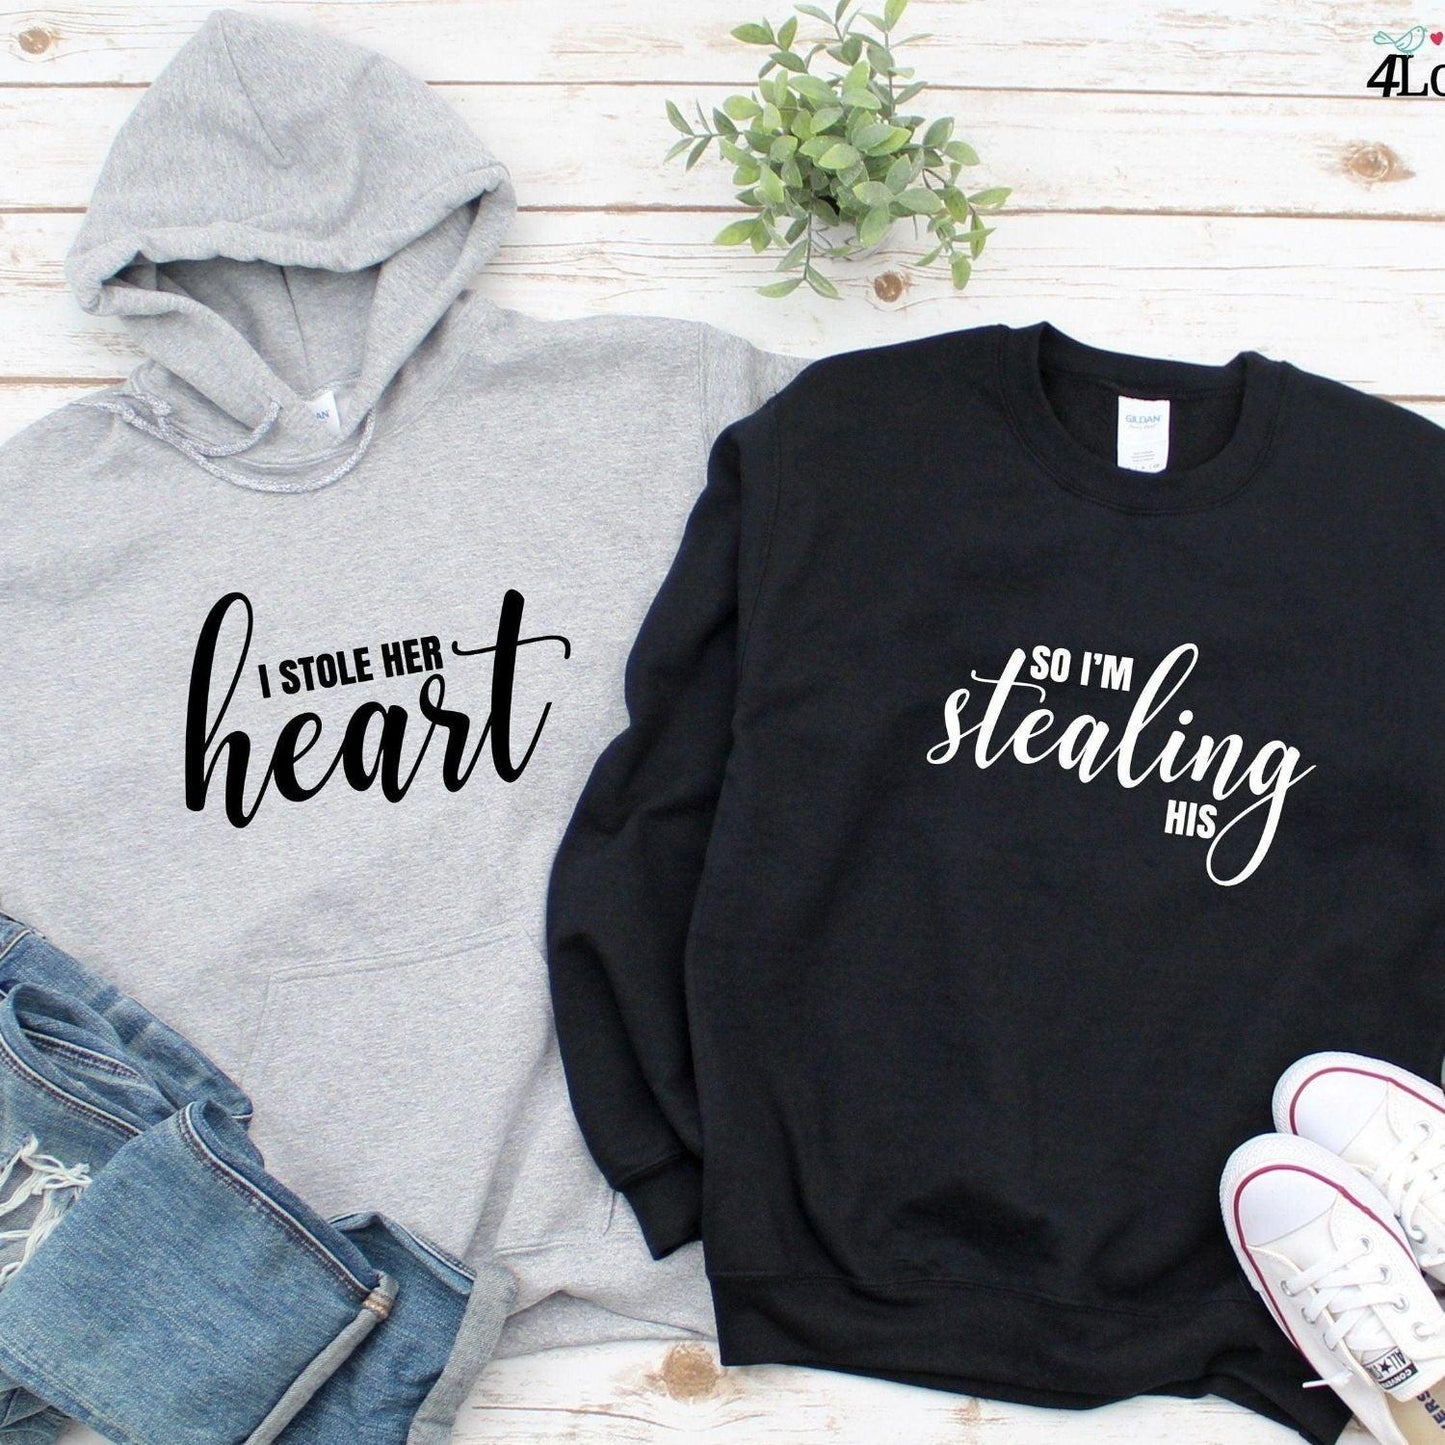 Spiffy Valentine's Matching Outfits for Couples: 'I Stole Her Heart & His' Set! - 4Lovebirds